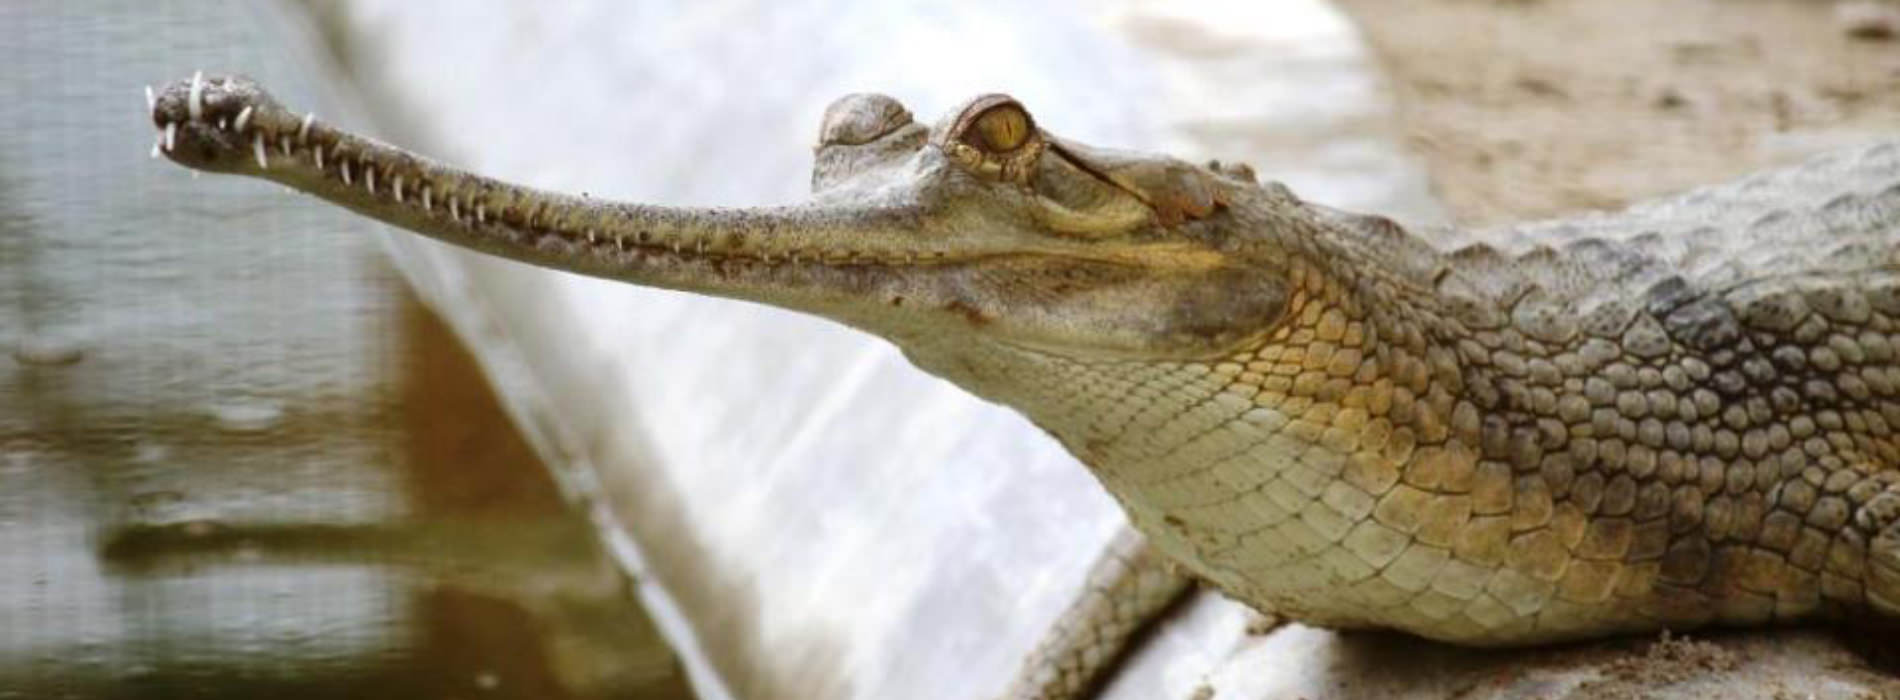 Gharial Facts And Information Seaworld Parks And Entertainment